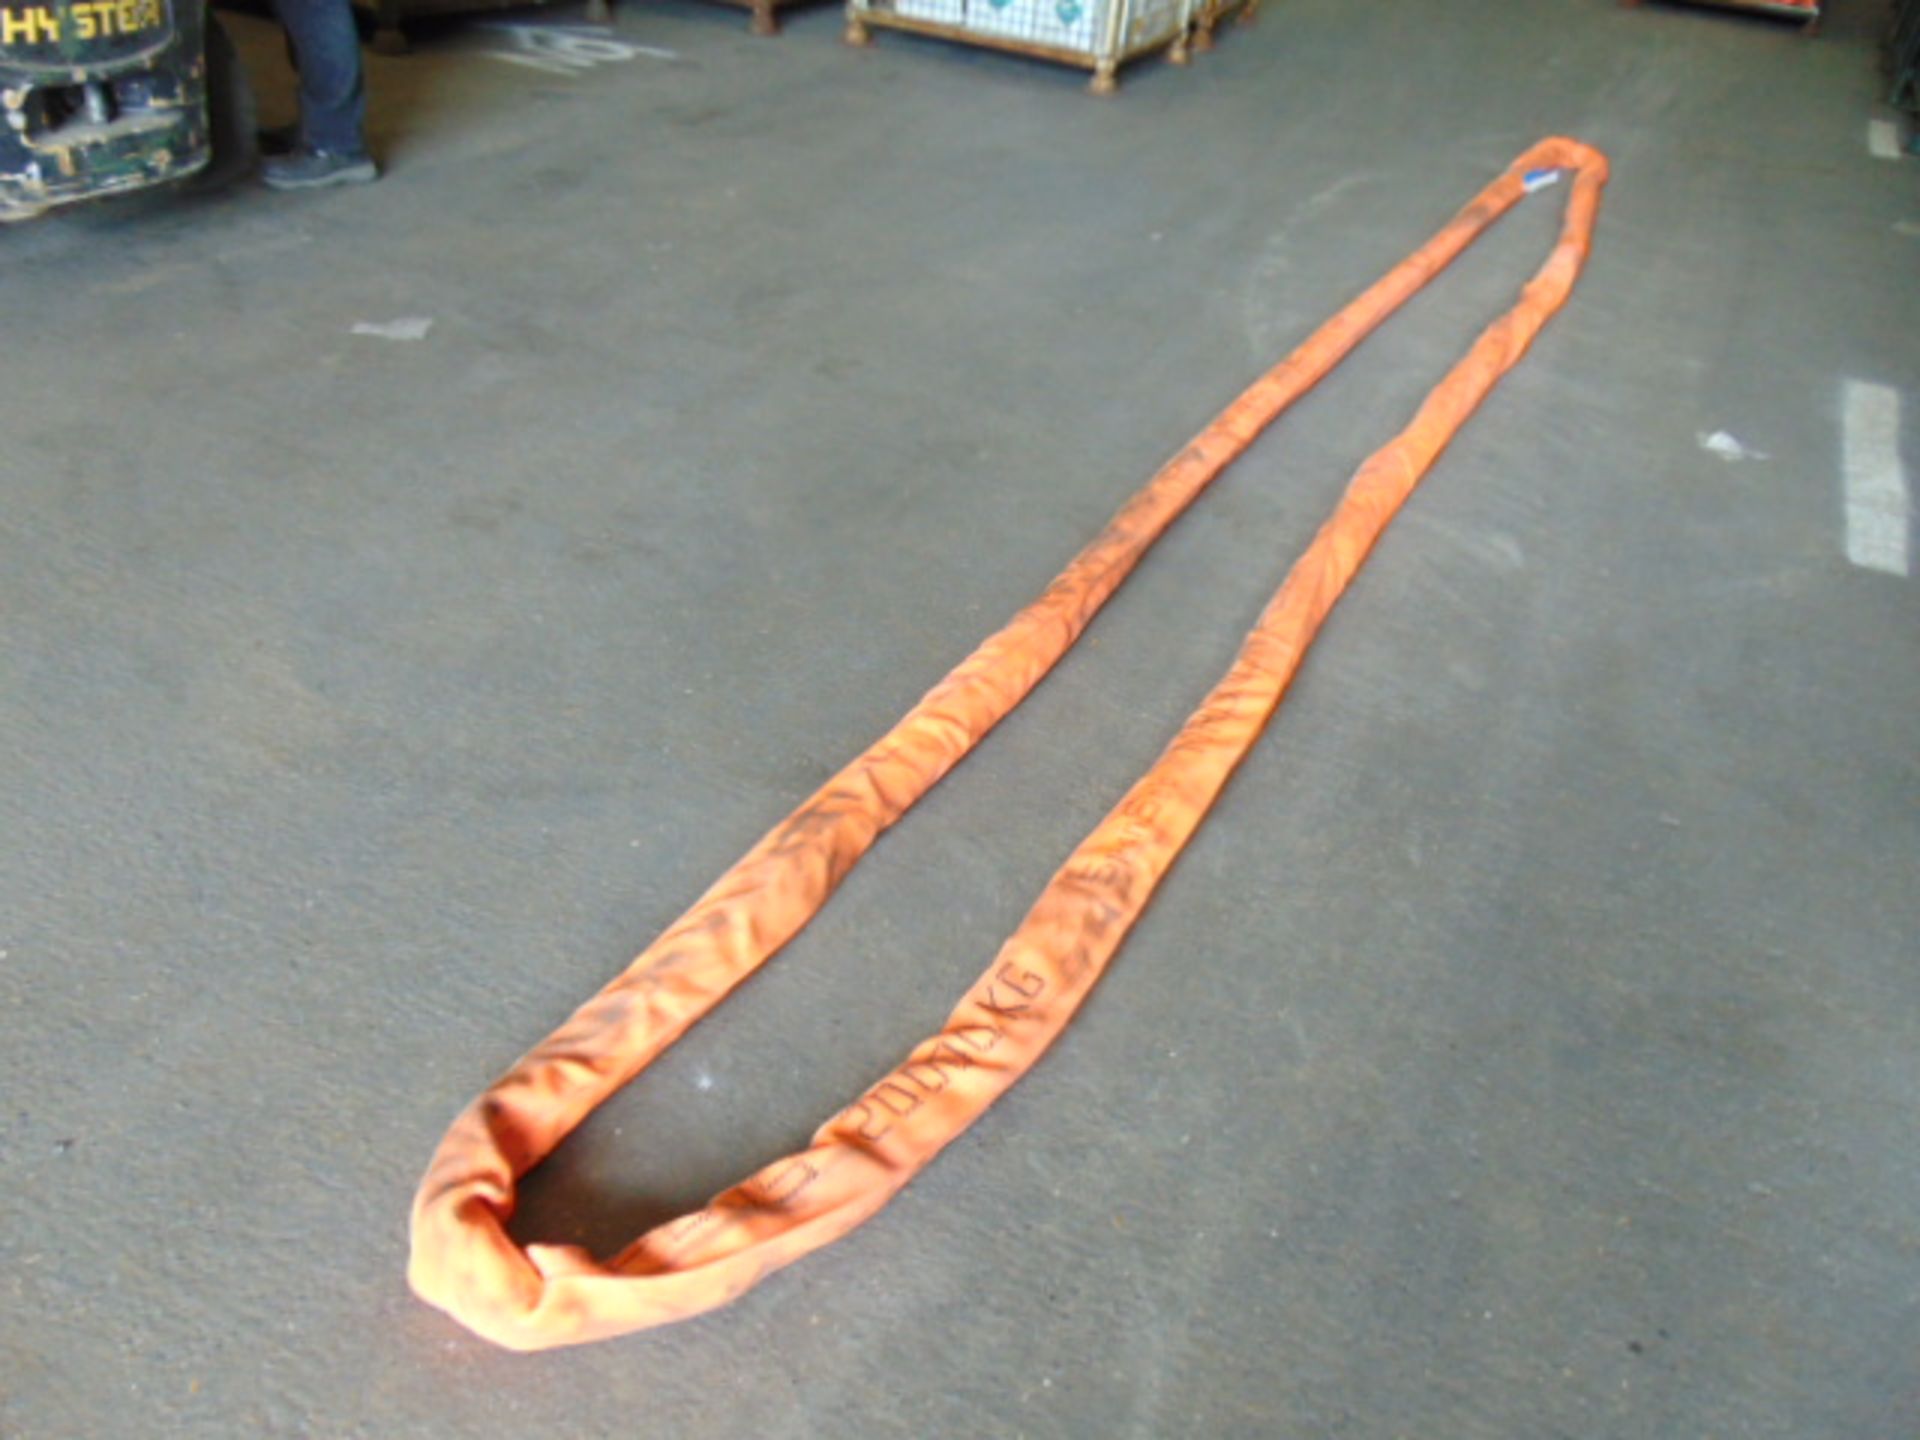 SpanSet Magnum 20,000kg Lifting/Recovery Strop from MOD - Image 2 of 5